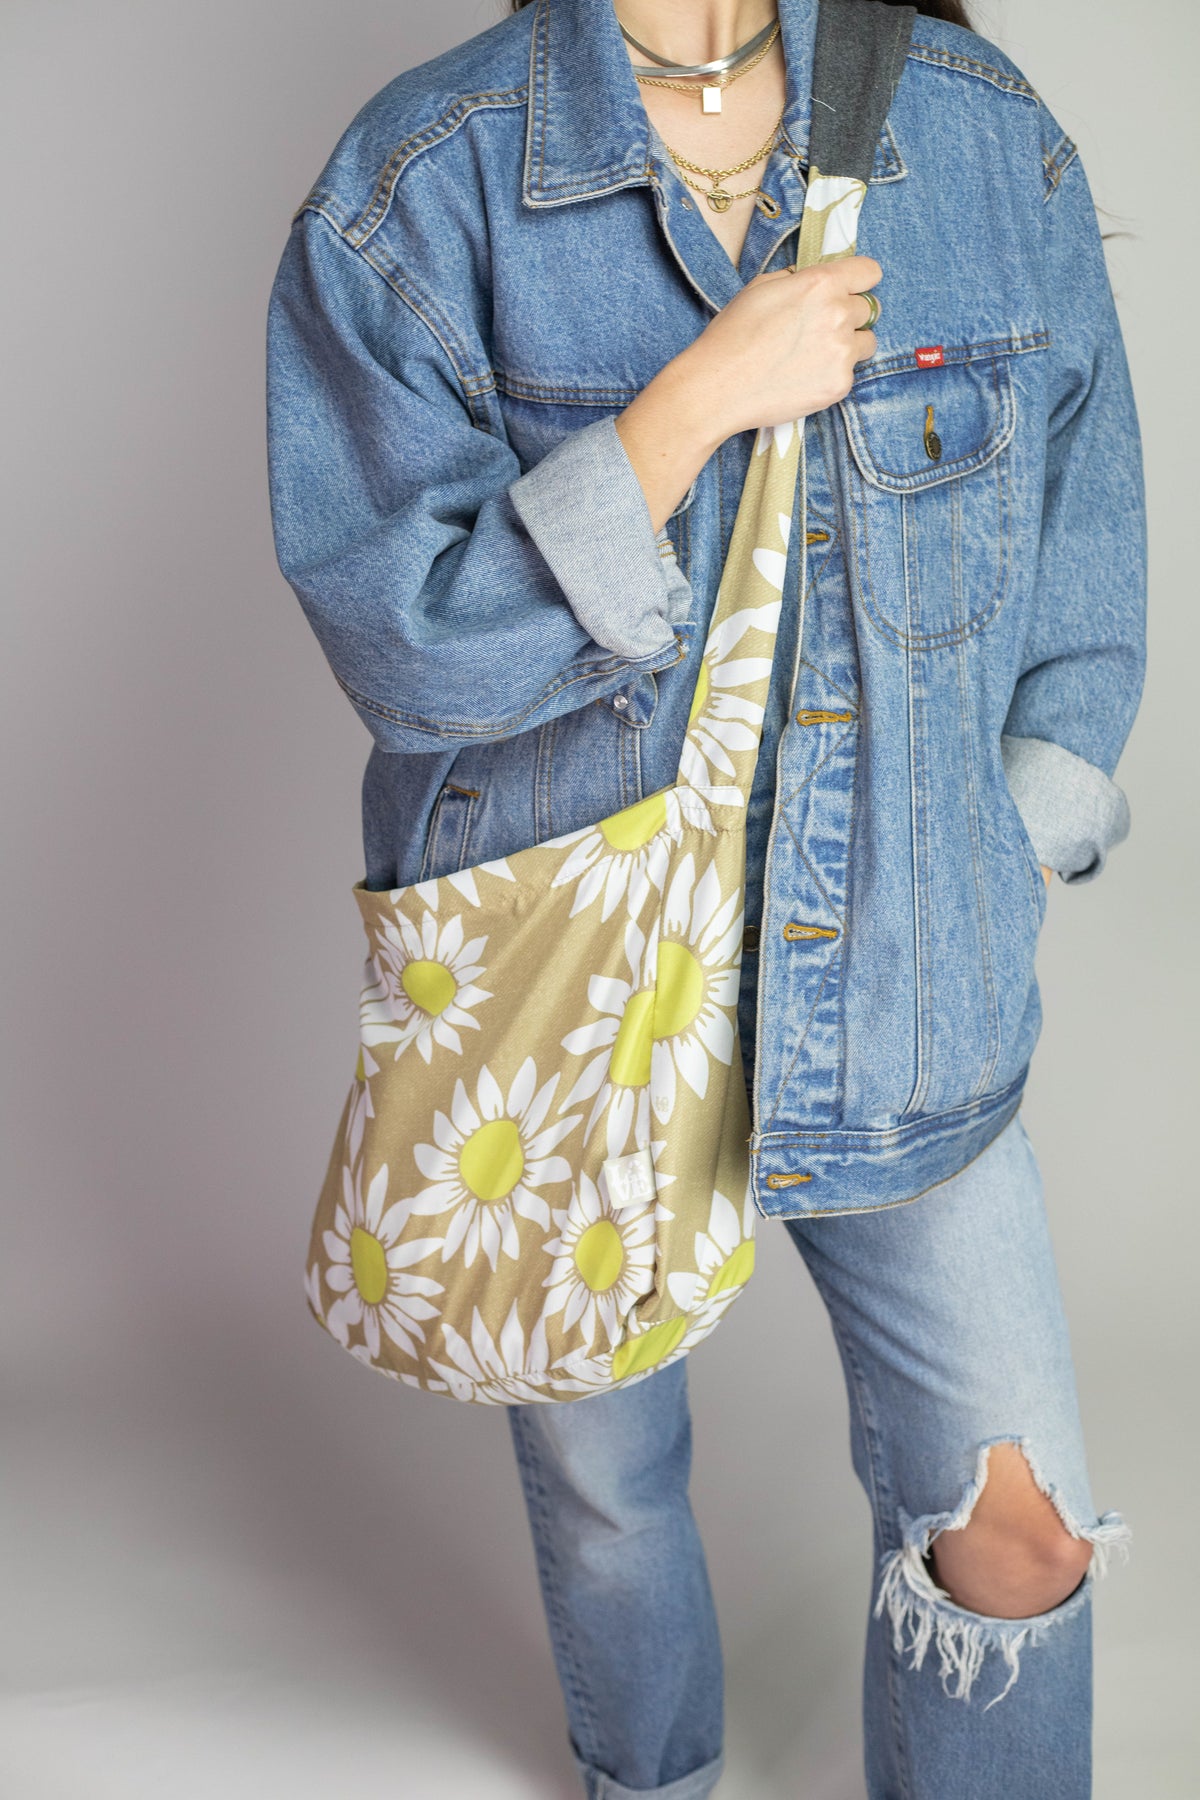 CROSSBODY STASH IT Tote Bag  -  SUNFLOWERS (WITH EXTRA LONG STRAP)